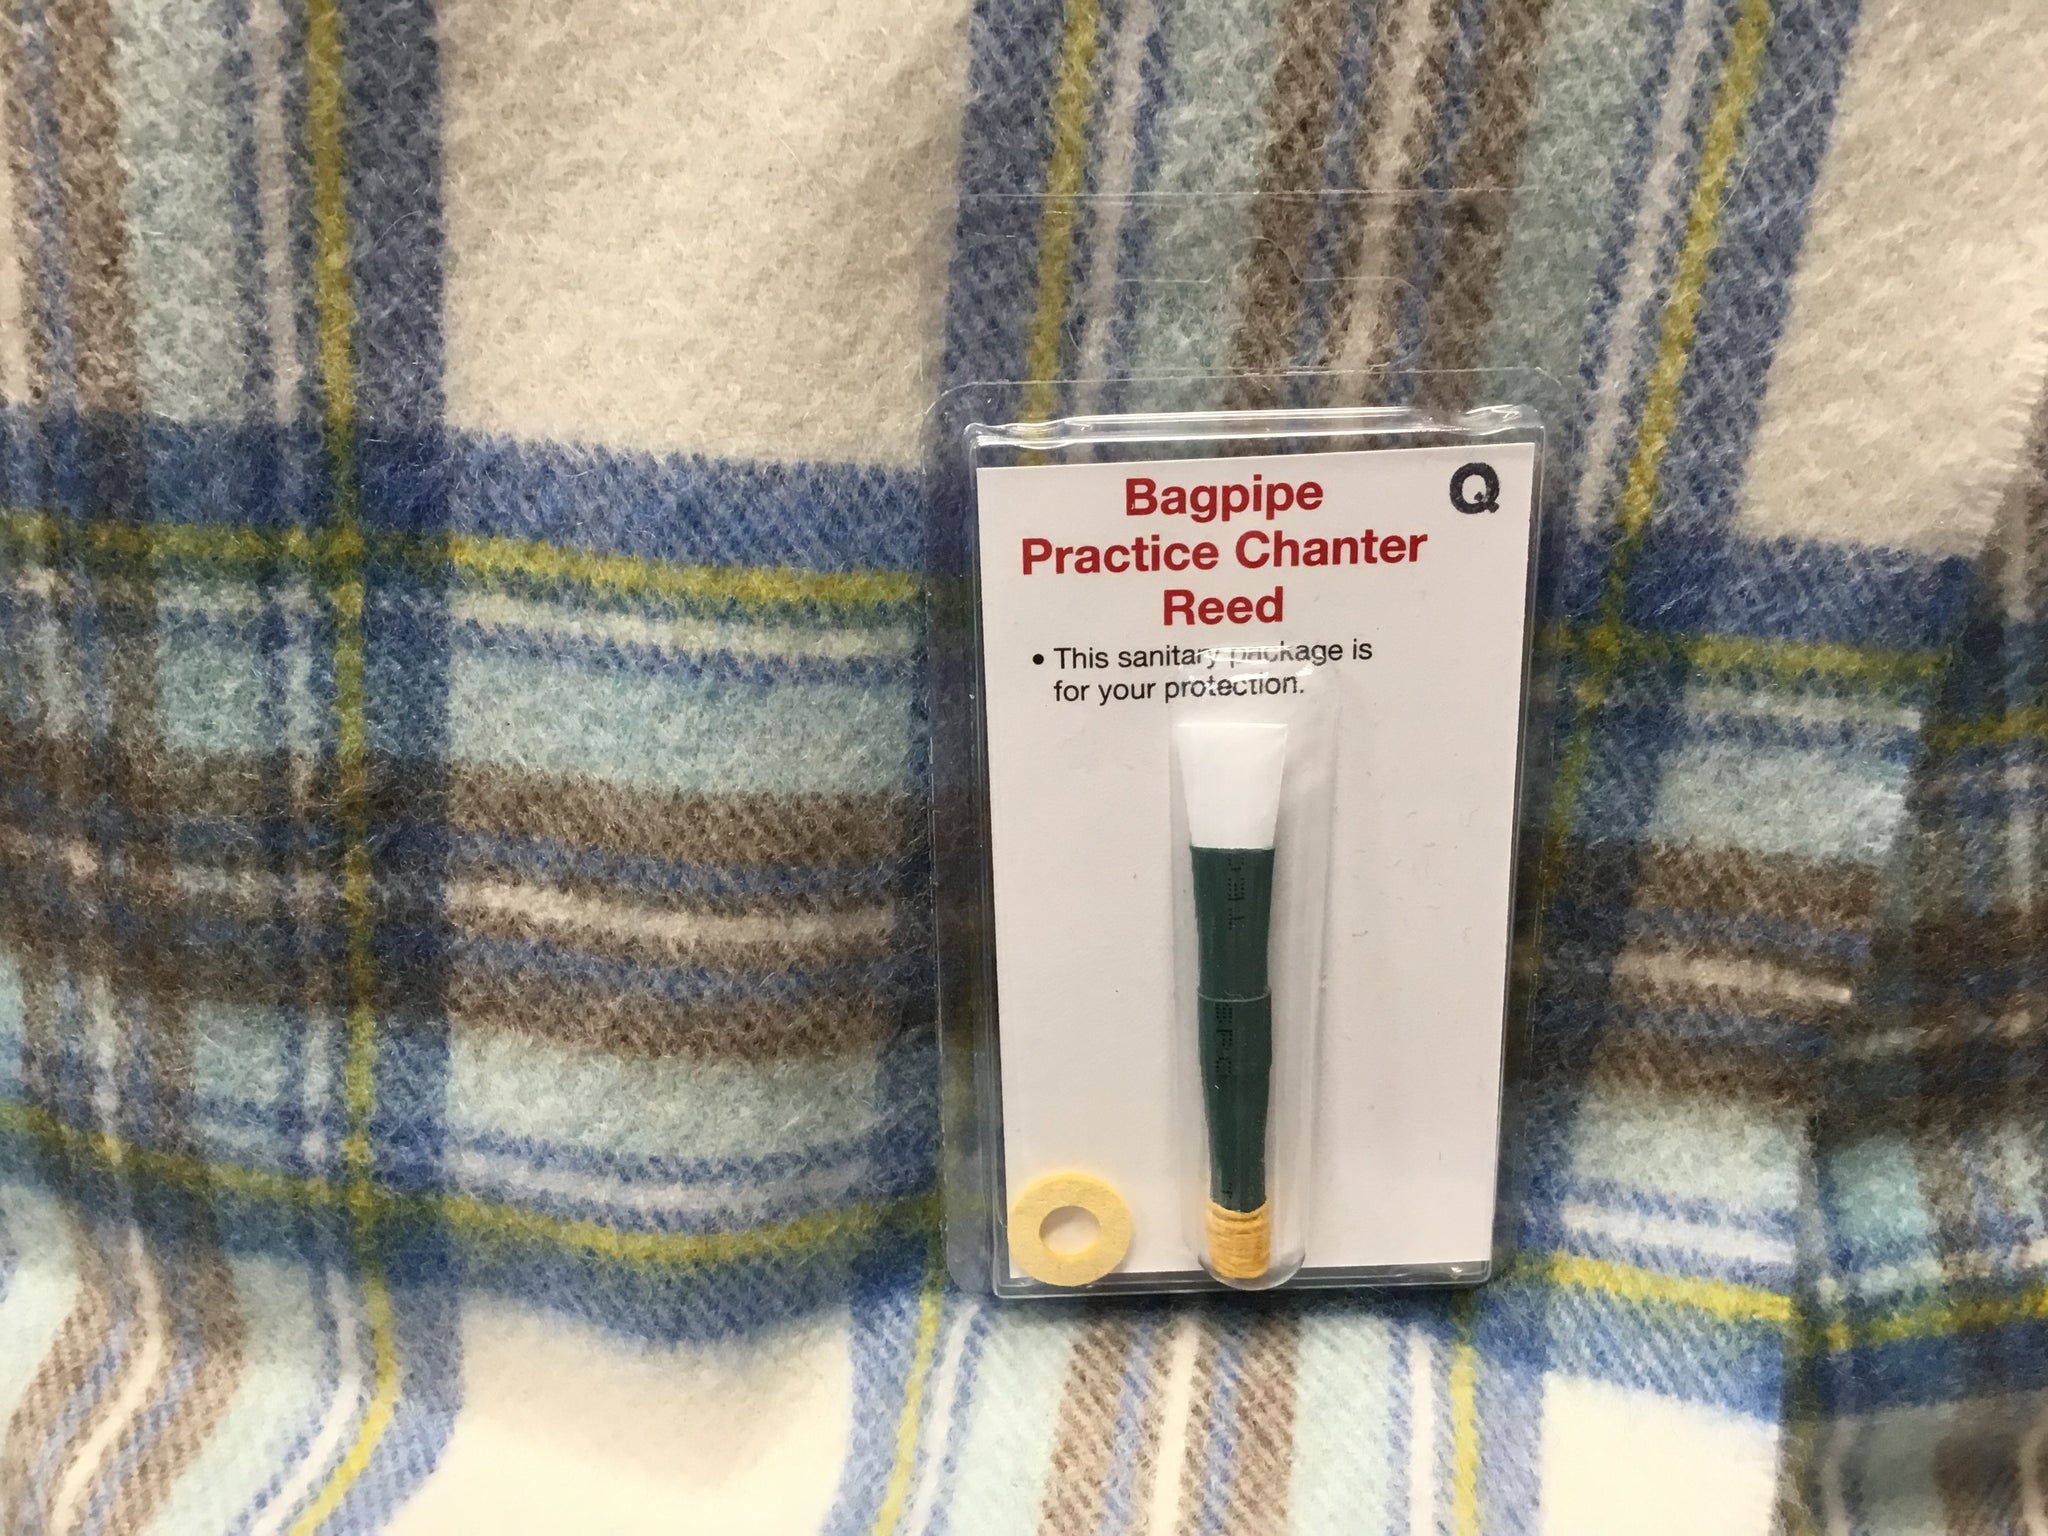 Bagpipe Practice Chanter Reed